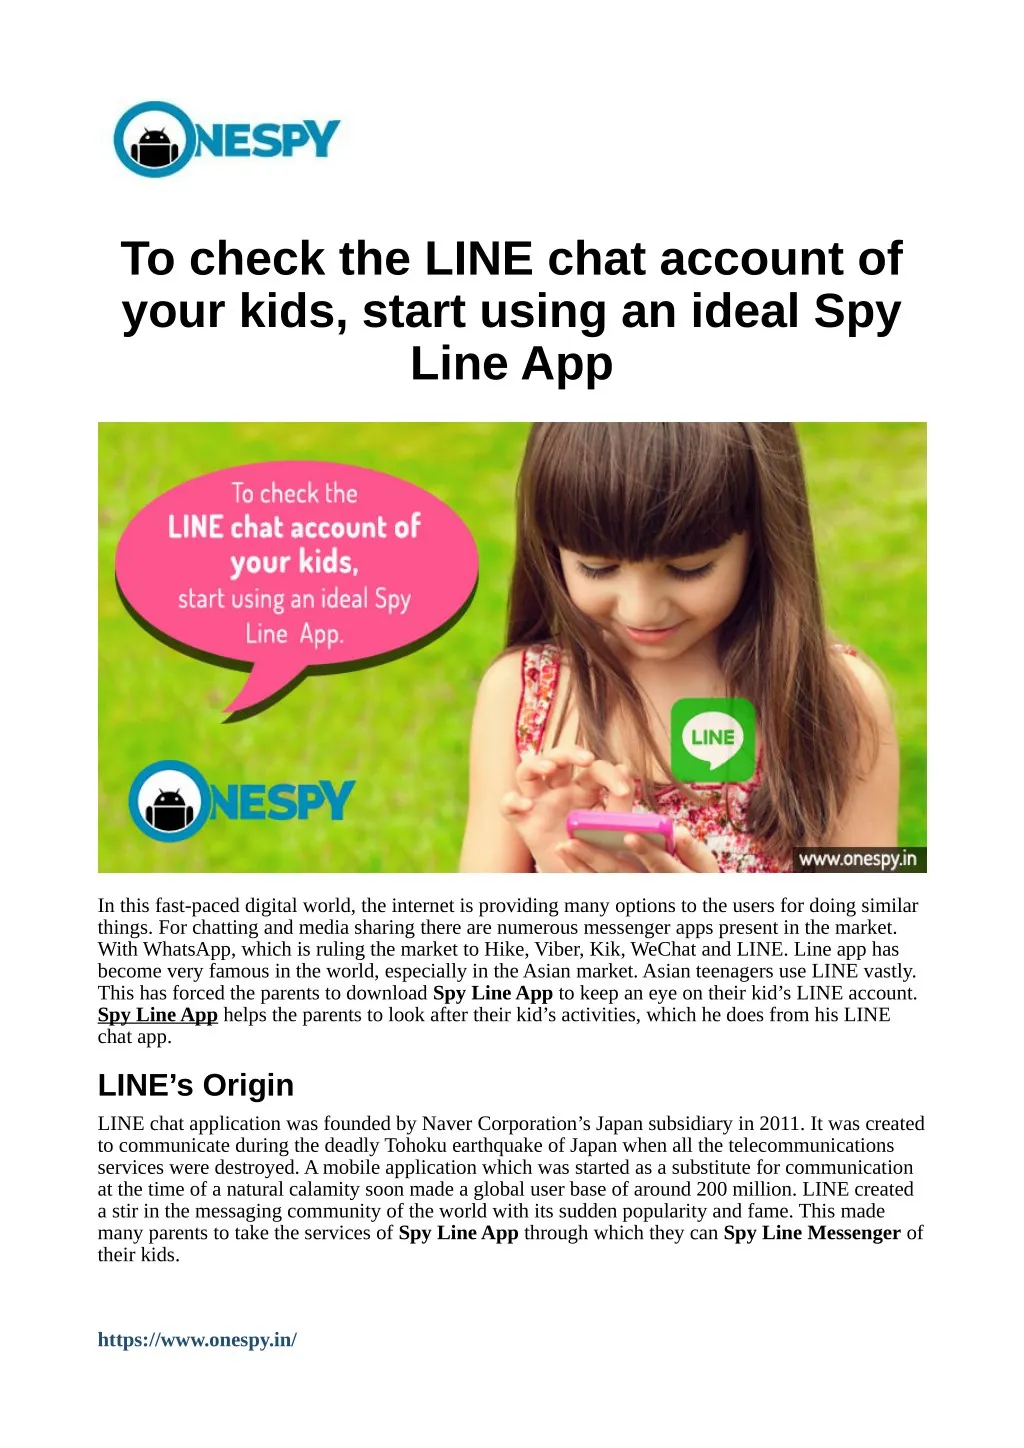 to check the line chat account of your kids start